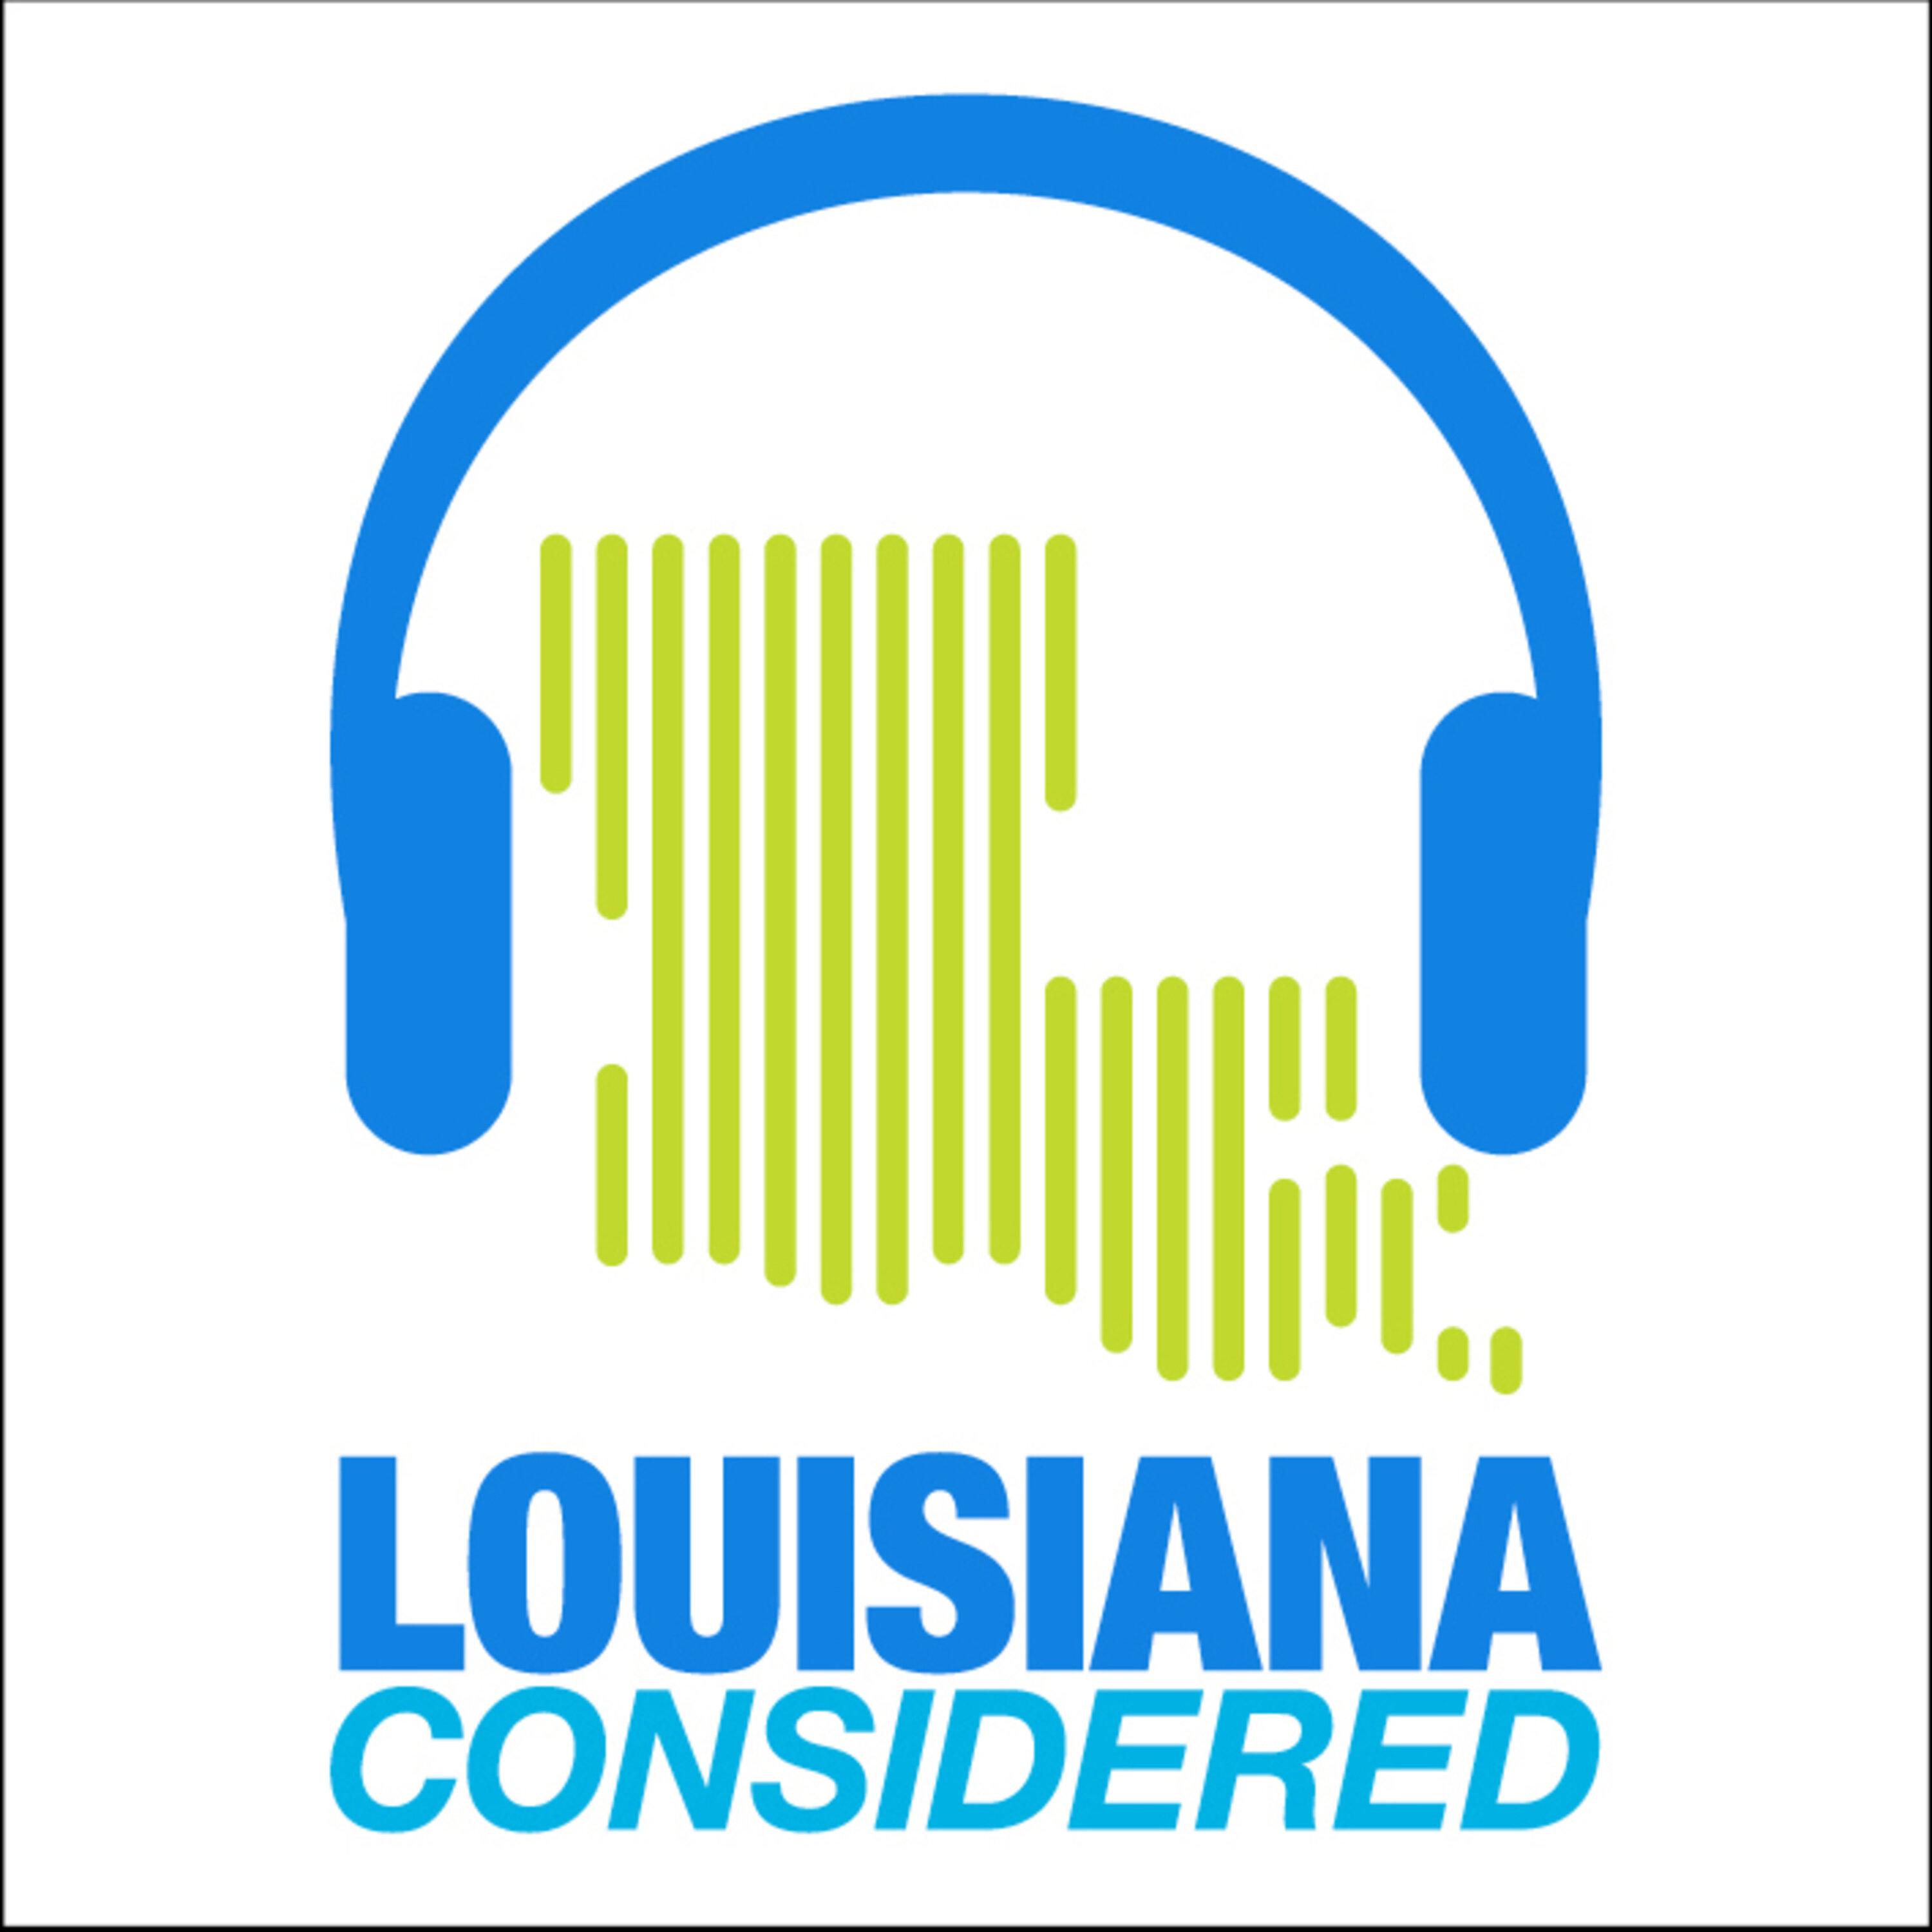 Thumbnail for "Louisiana Considered: Trash Collection Yet To Resume In New Orleans, How Infrastructure Changes After A Major Storm, NWS Satellite Moving Closer To Baton Rouge, Late City".